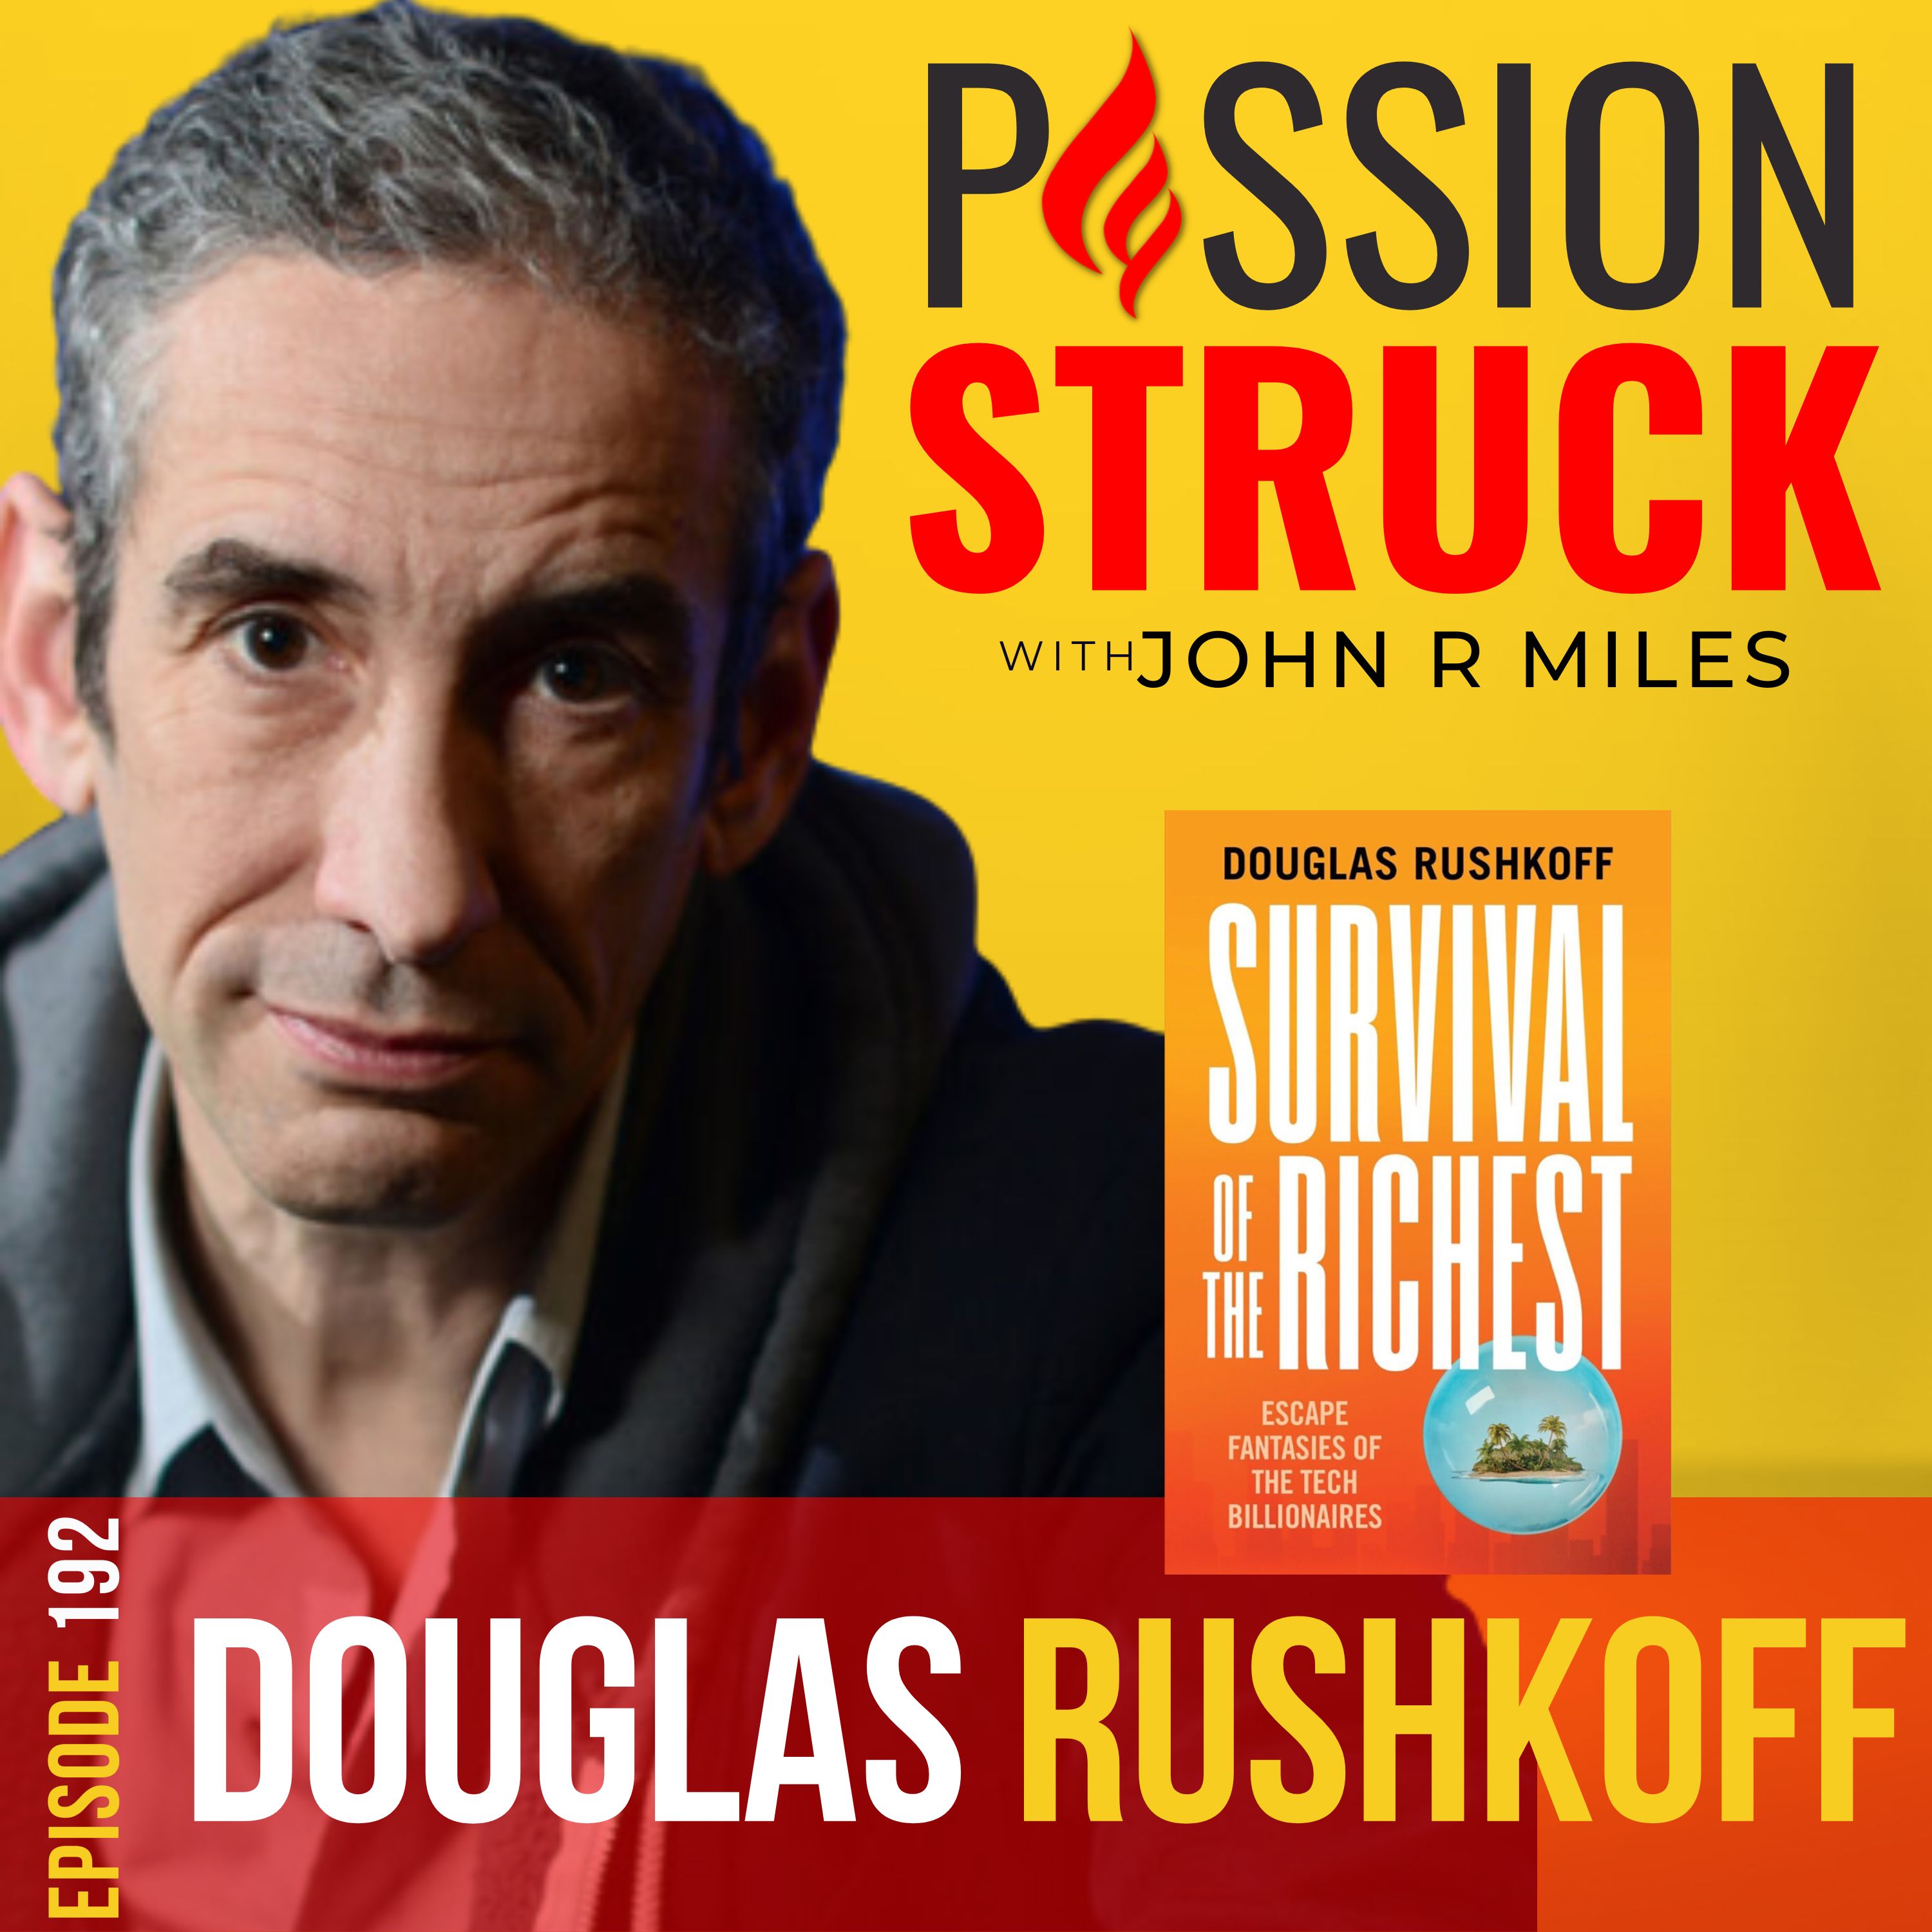 Passion Struck with John R. Miles album cover episode 192 with Douglas Rushkoff on survival of the richest